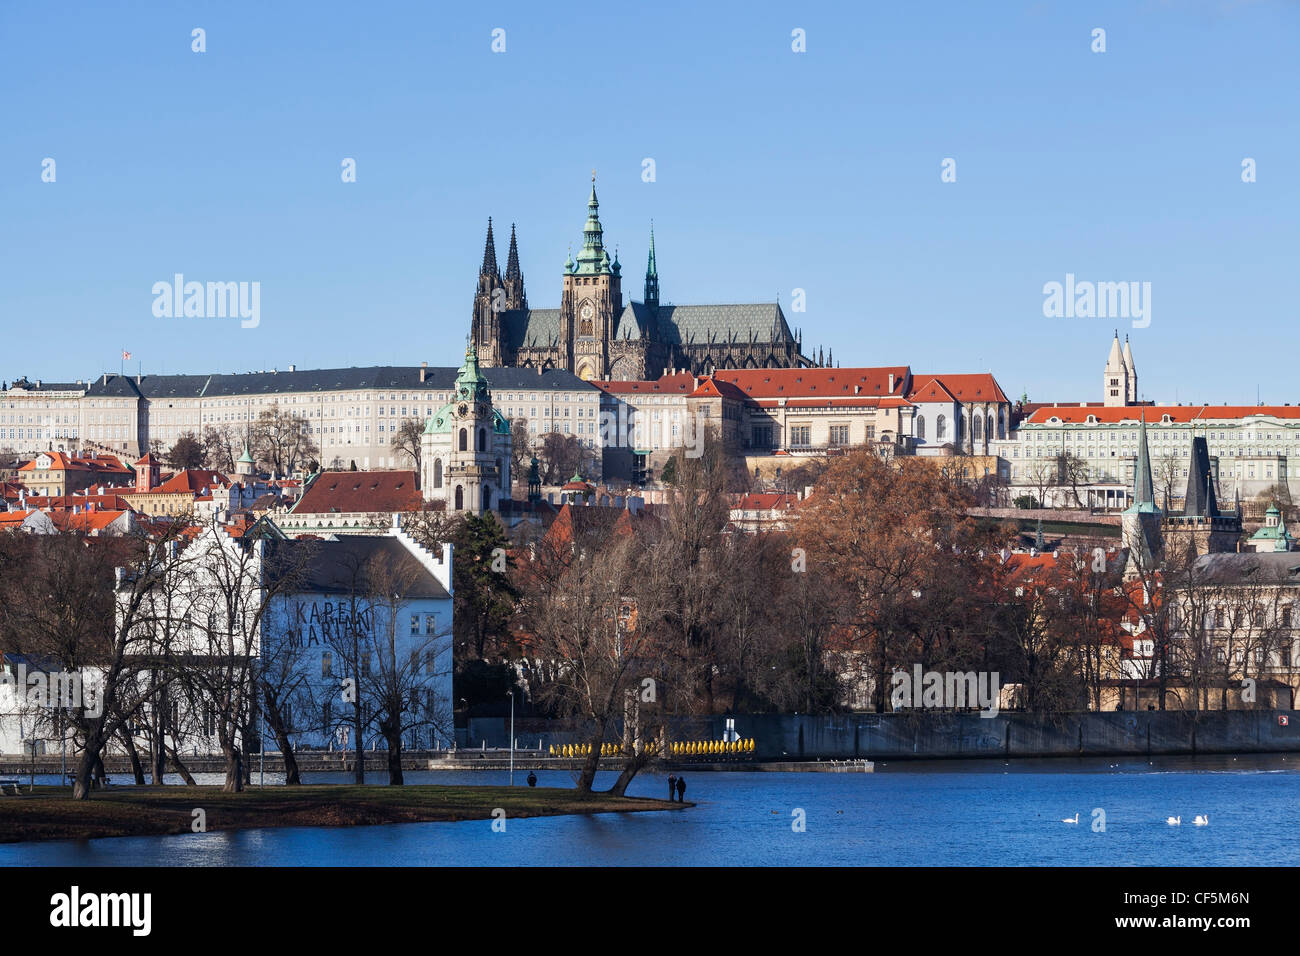 Lesser Town and Hradcany, with St Vitus Cathedral, Prague Castle and Vltava River, Pragu, Czech Republic Stock Photo